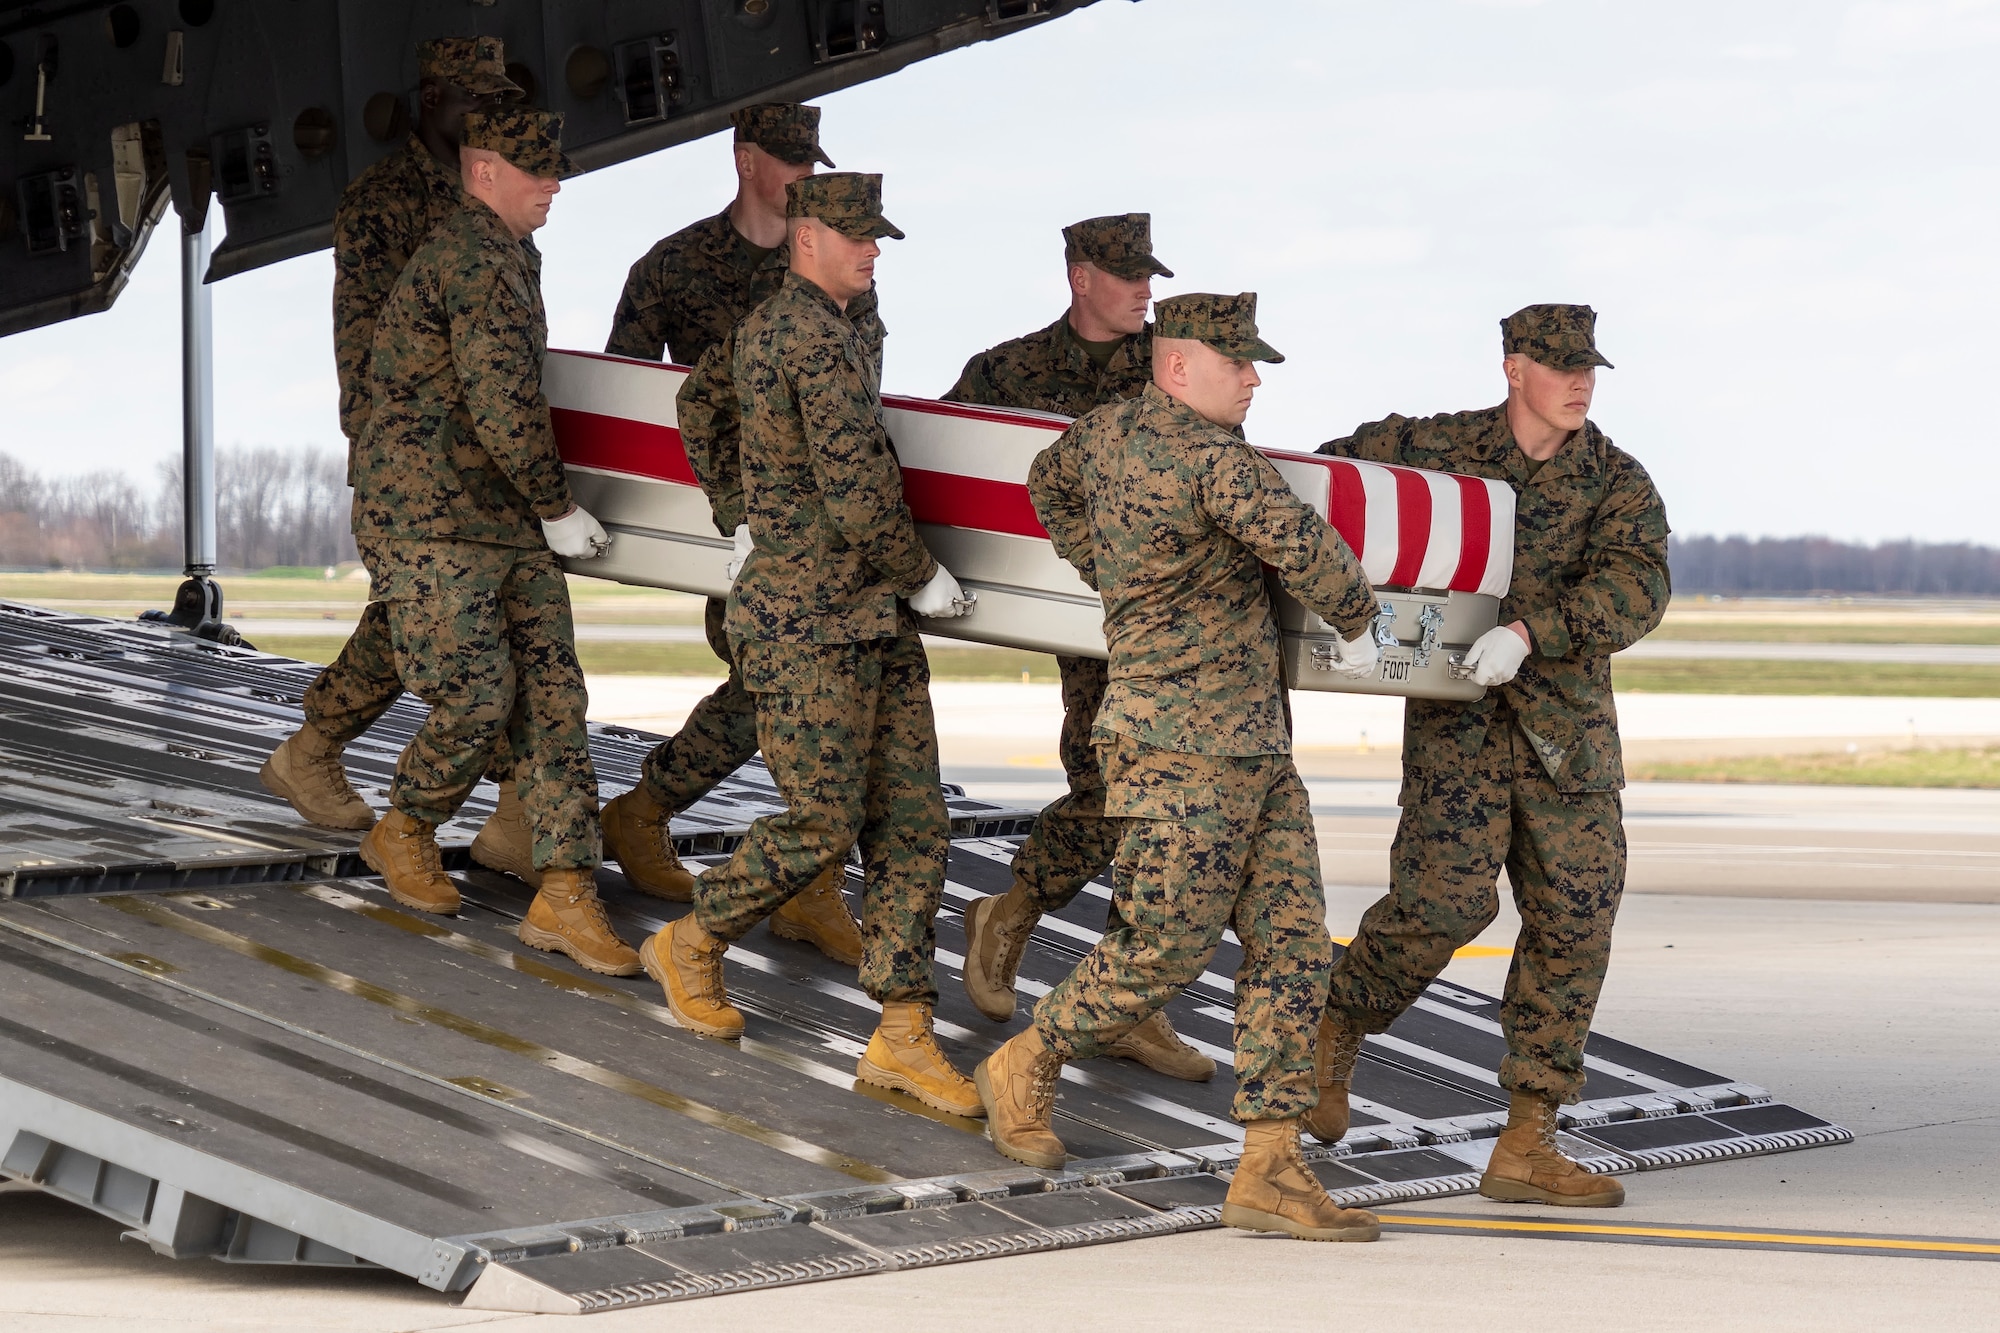 Marine Capt. Ross A. Reynolds honored in dignified transfer March 25